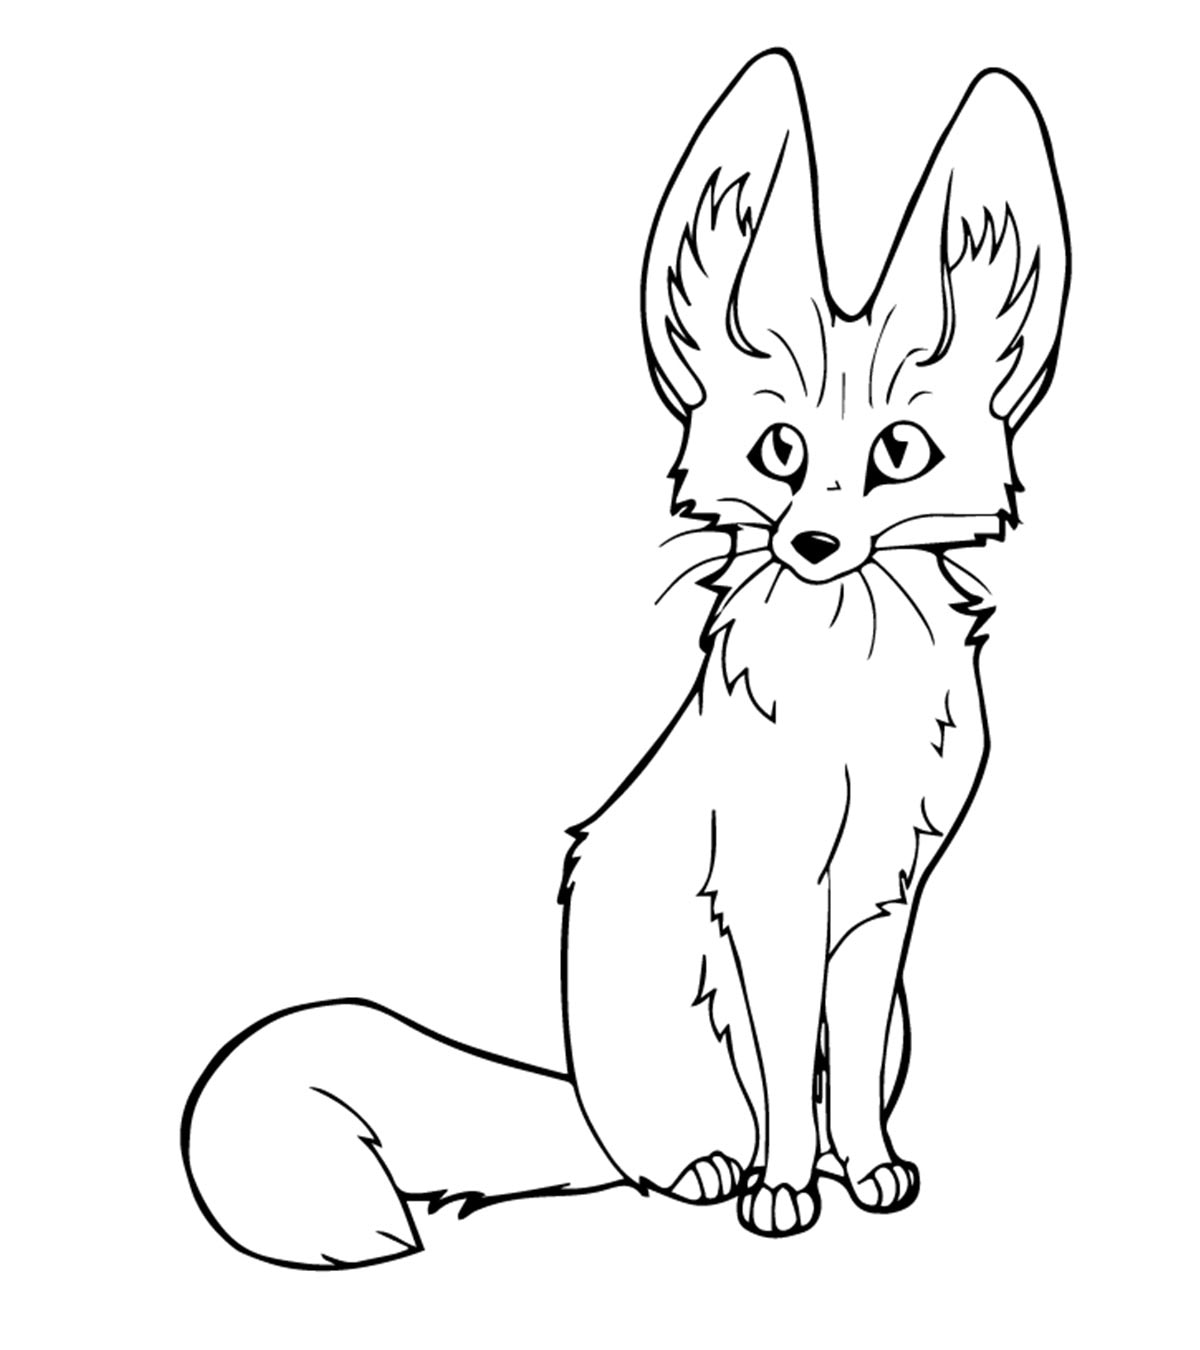 25 Interesting Fox Coloring Pages Your Toddler Will Love_image